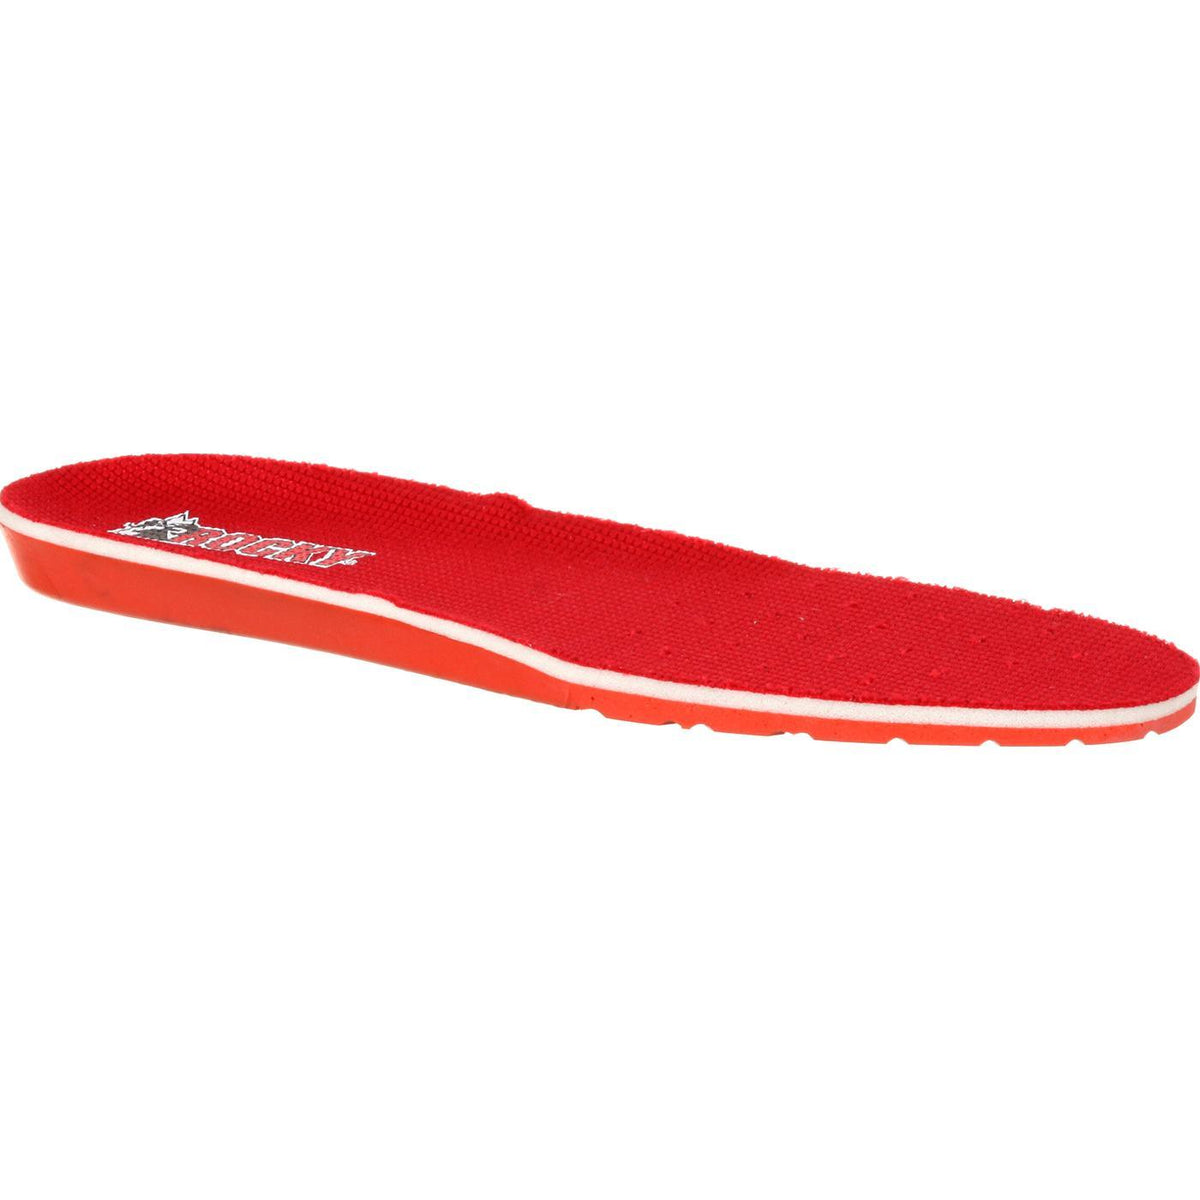 Rocky EnergyBed Footbed - Flyclothing LLC